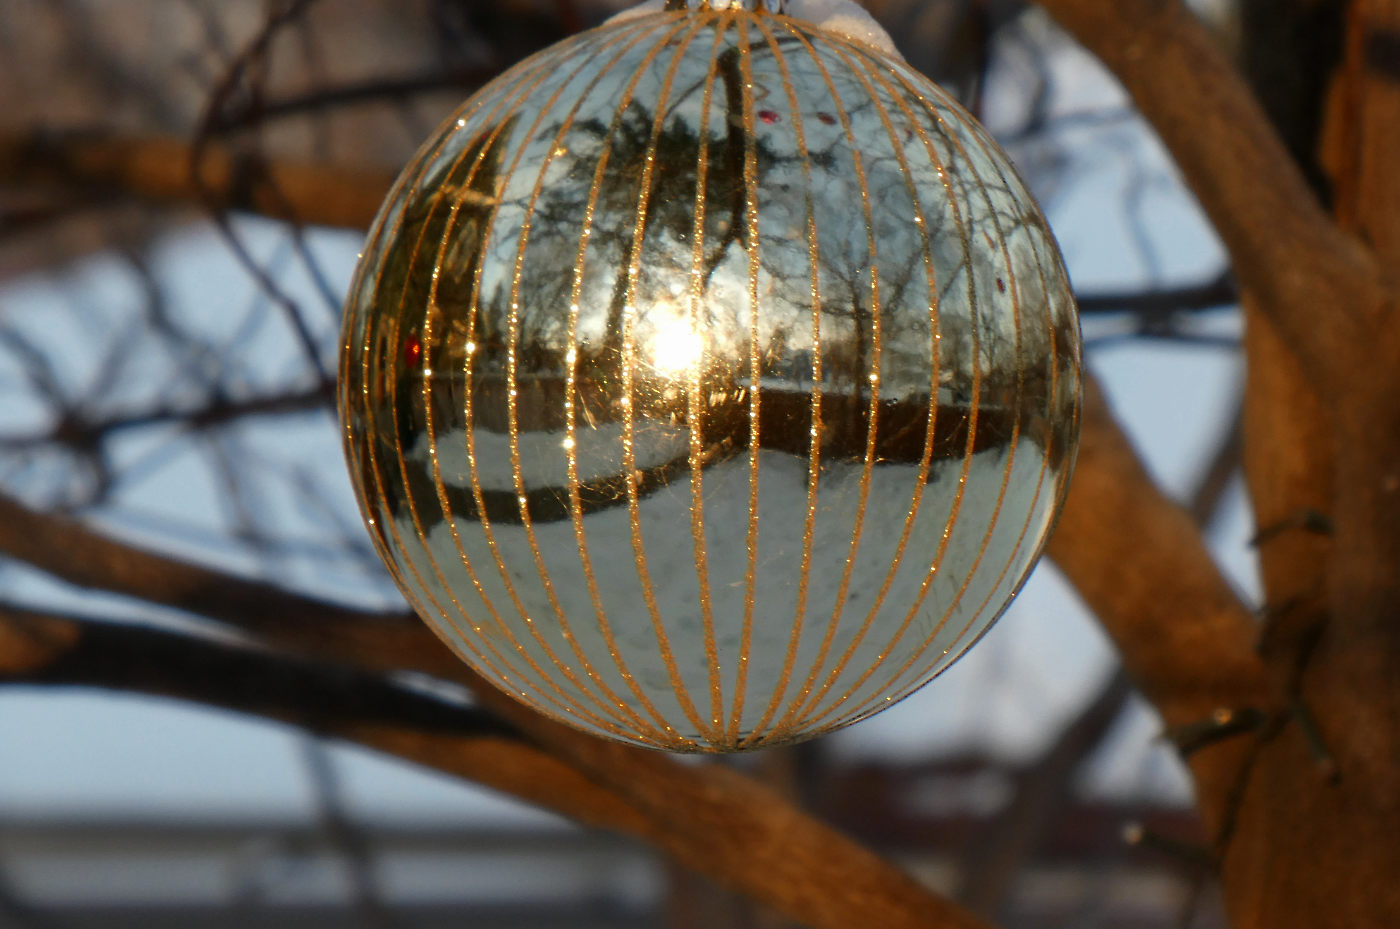 Silver ball with sparkly gold stripes reflecting a sunset with yellow-orange glowing tree branches in background